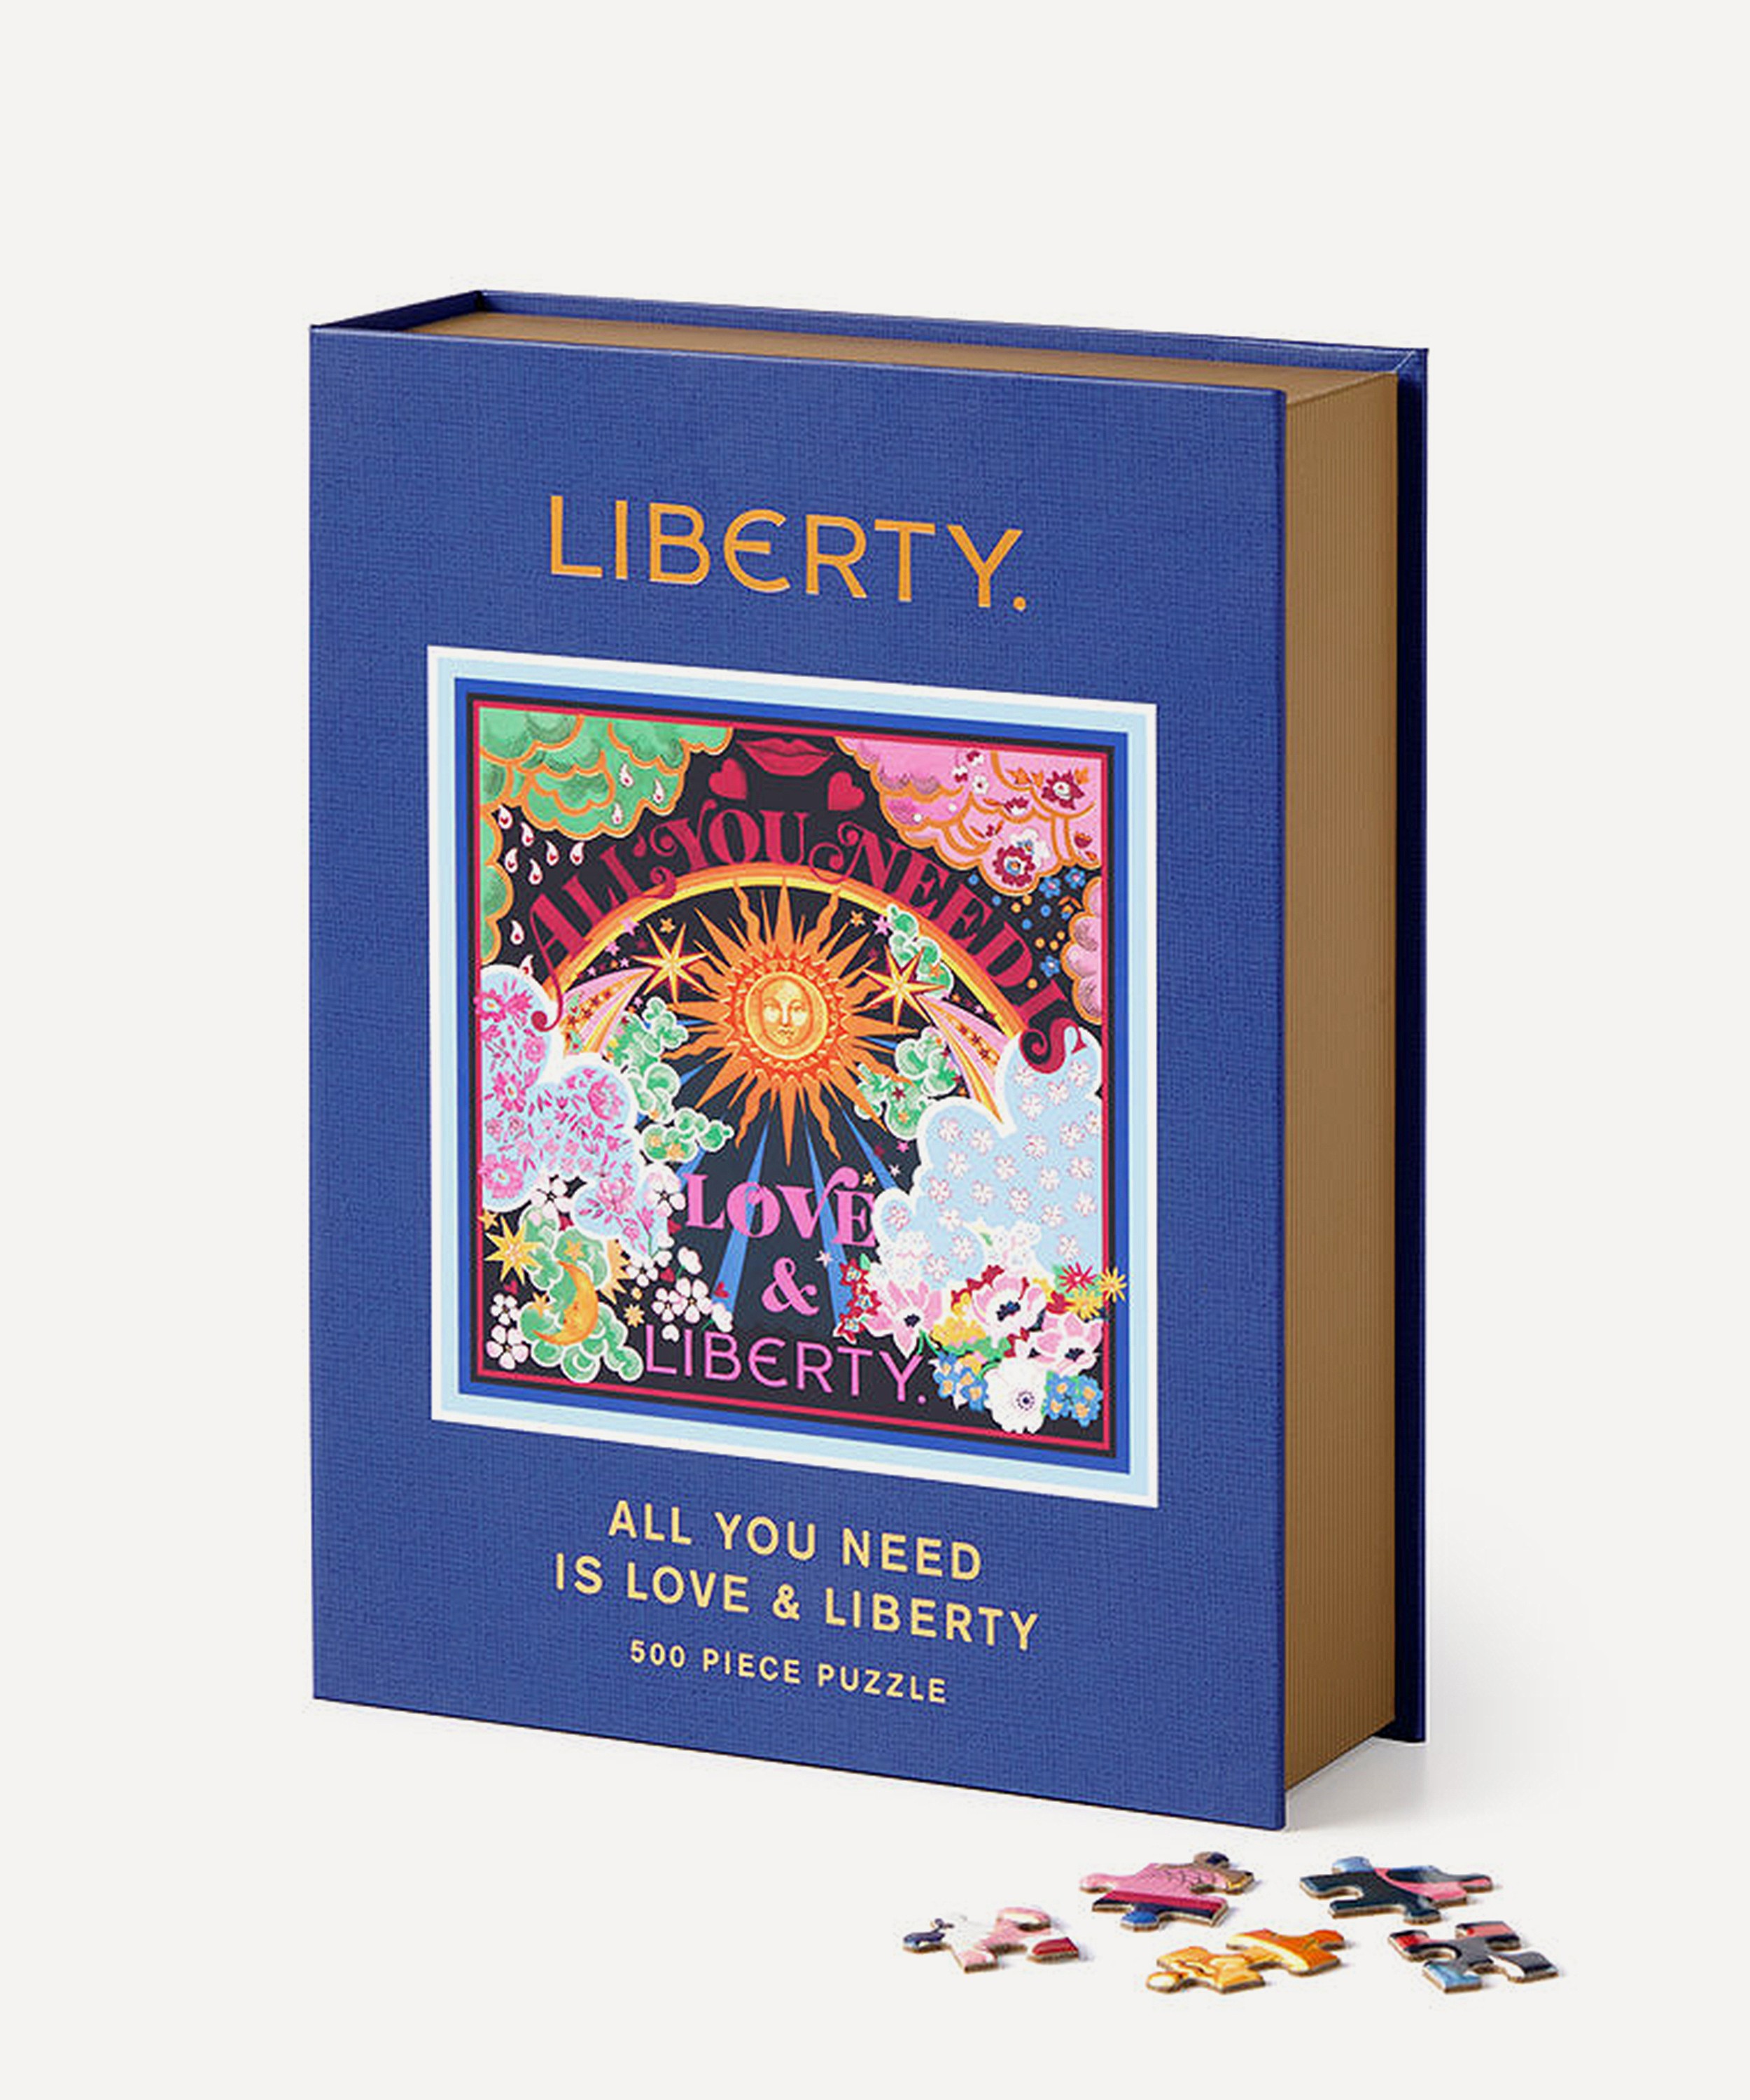 Liberty - All You Need is Love & Liberty 500 Piece Book Box Puzzle